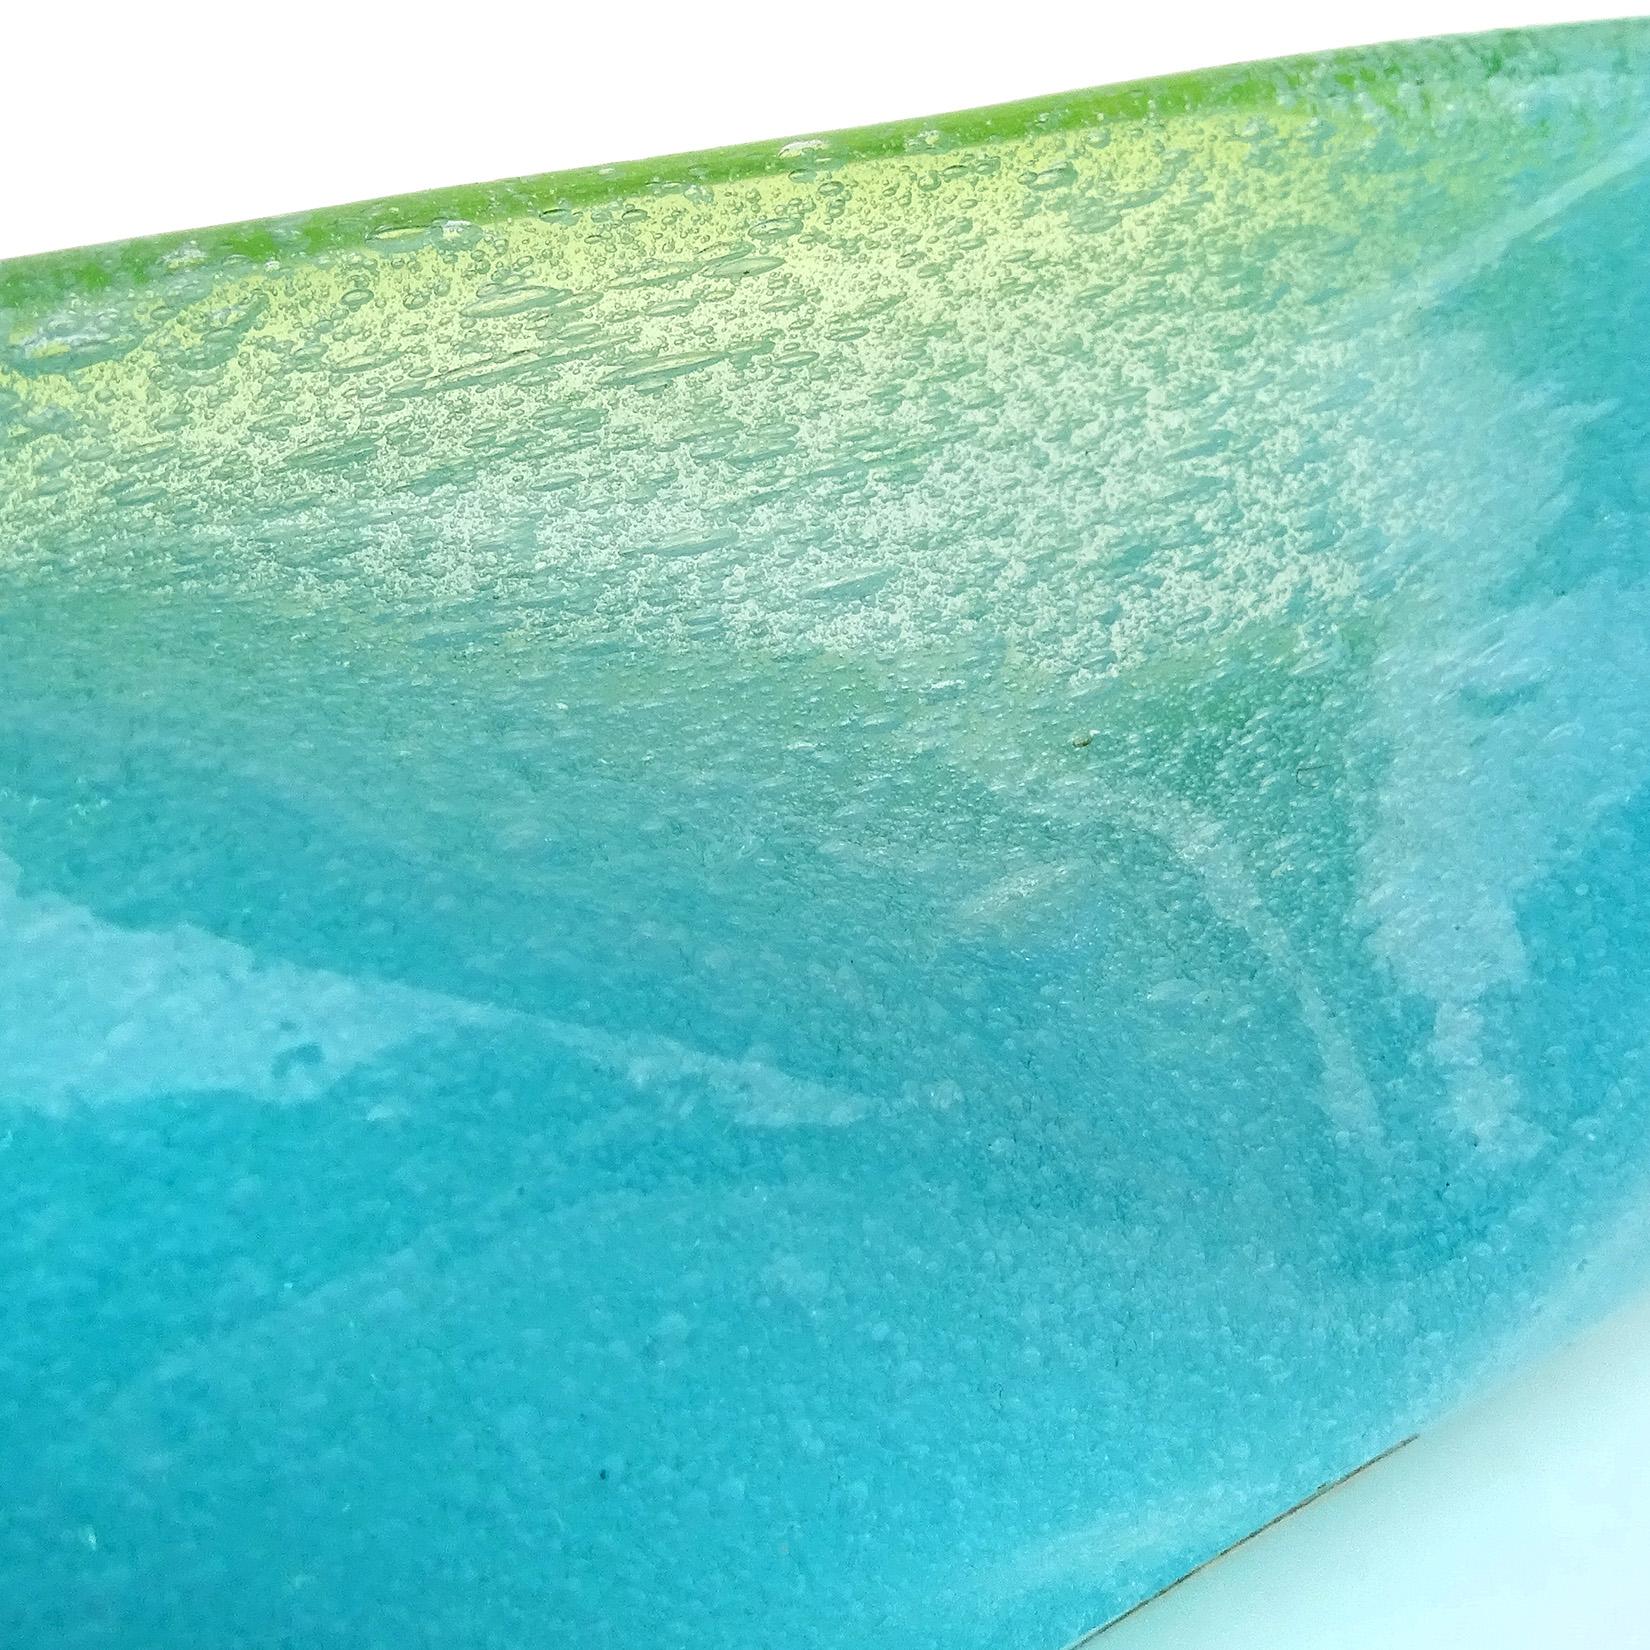 AVeM Murano Blue Green Pulegoso Bubbles Italian Art Glass Bowl with Label In Good Condition For Sale In Kissimmee, FL